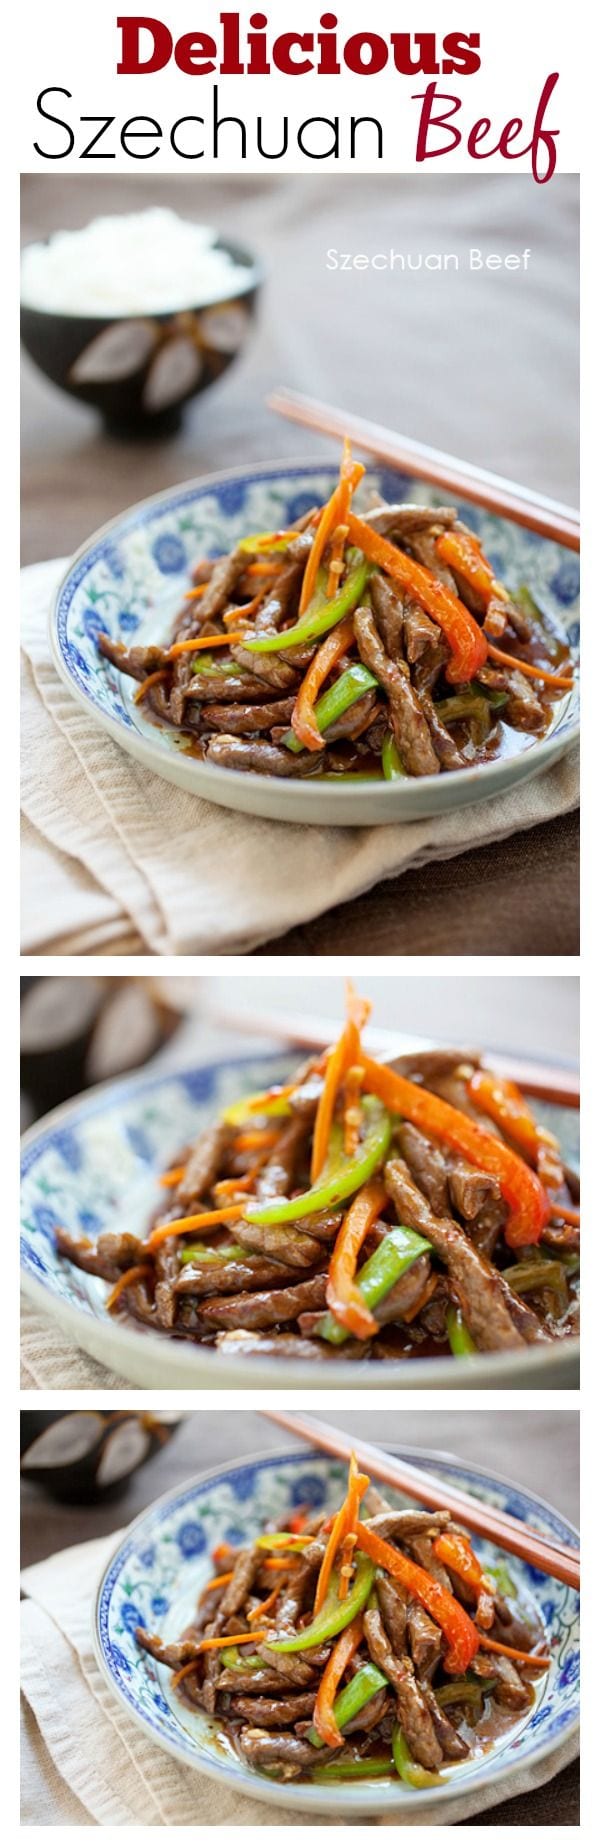 Szechuan Beef - easy and delicious beef stir-fried with red and green bell peppers, in a mildy spicy savory sauce, so yummy! | rasamalaysia.com